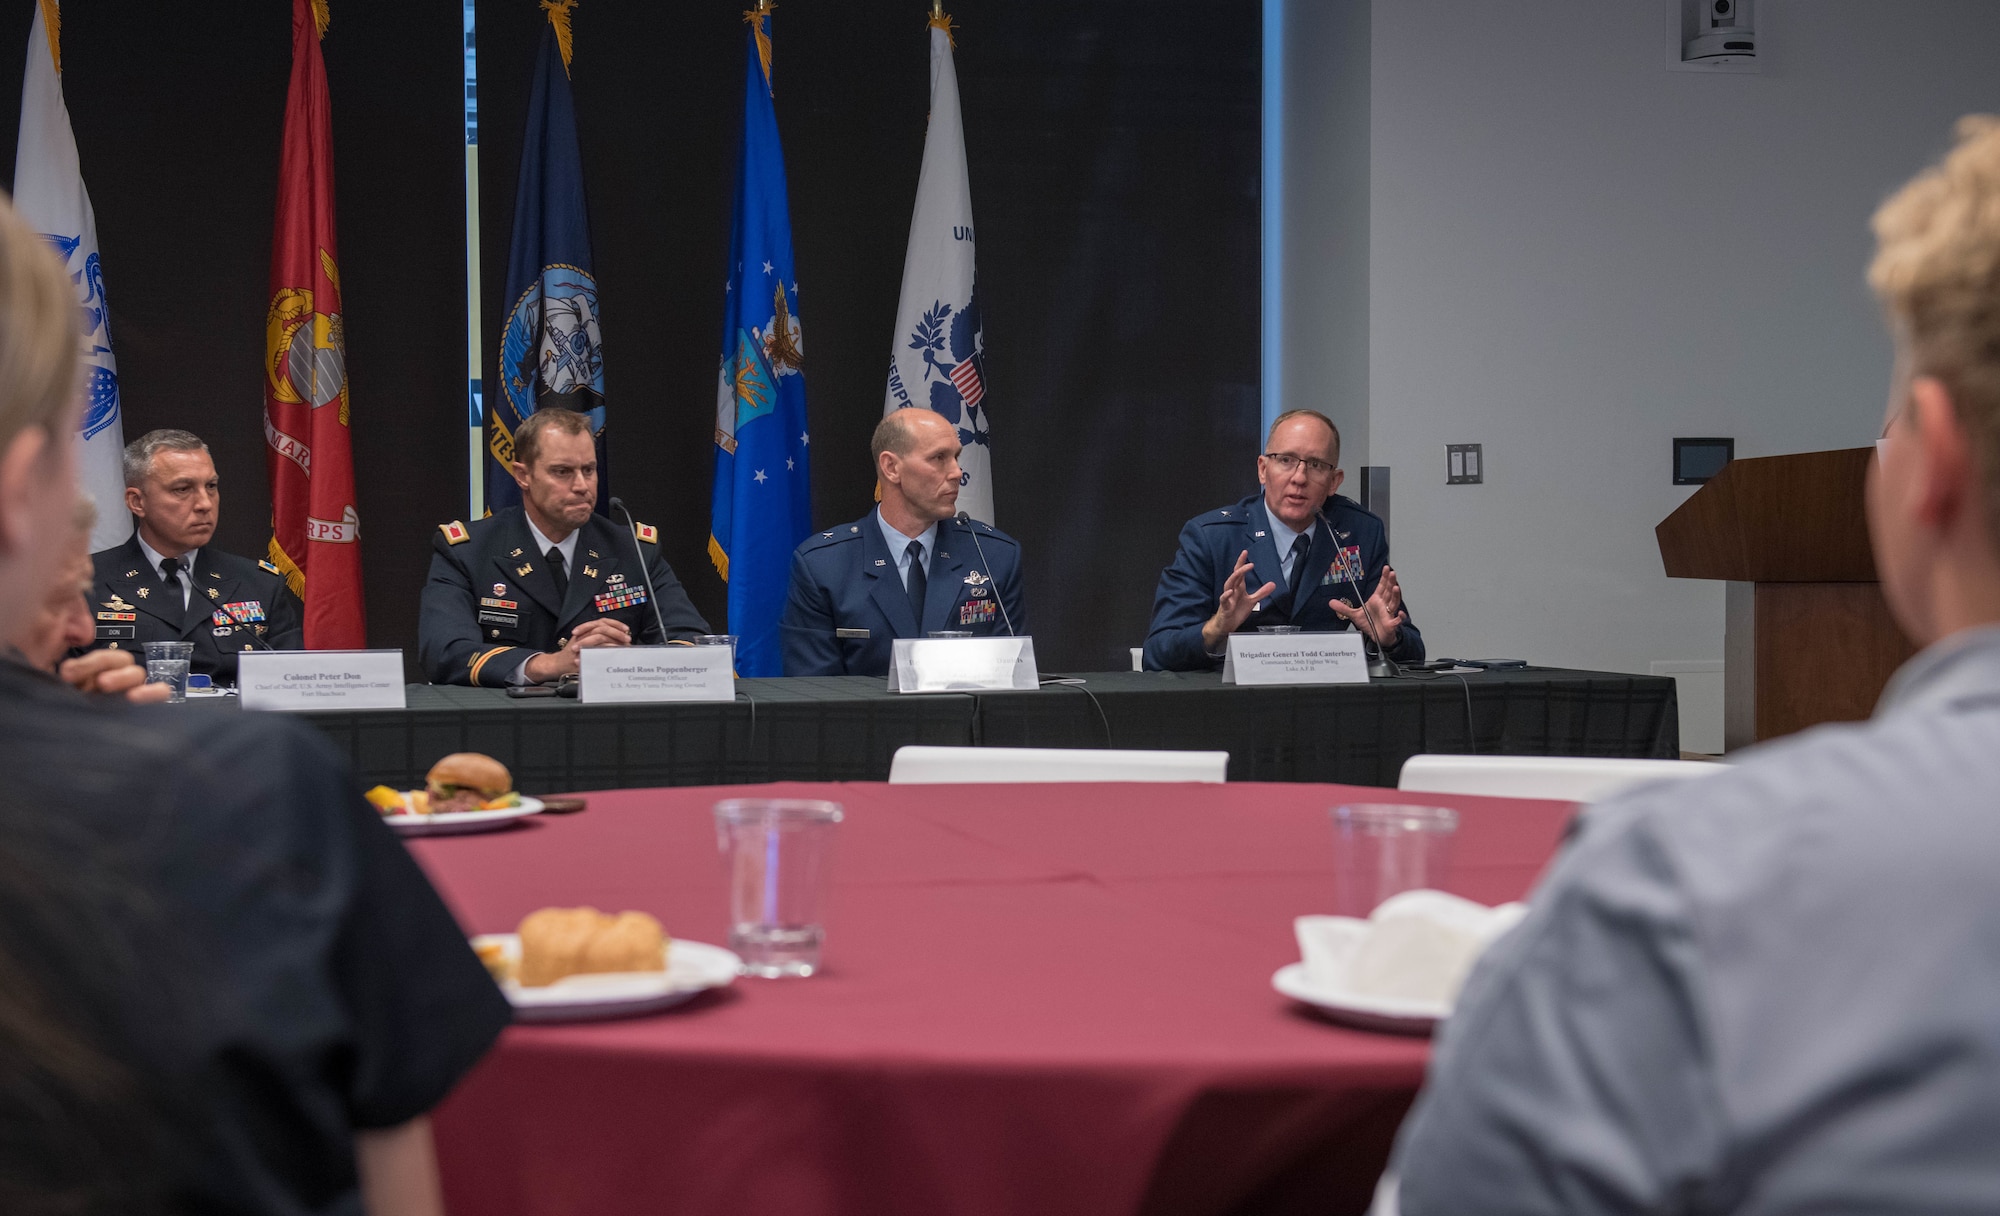 Brig. Gen. Todd D. Canterbury, 56th Fighter Wing commander, participates in a panel discussion with fellow Arizona military leaders Nov. 1, 2019, at the Arizona State University Fulton Center in Tempe, Ariz.